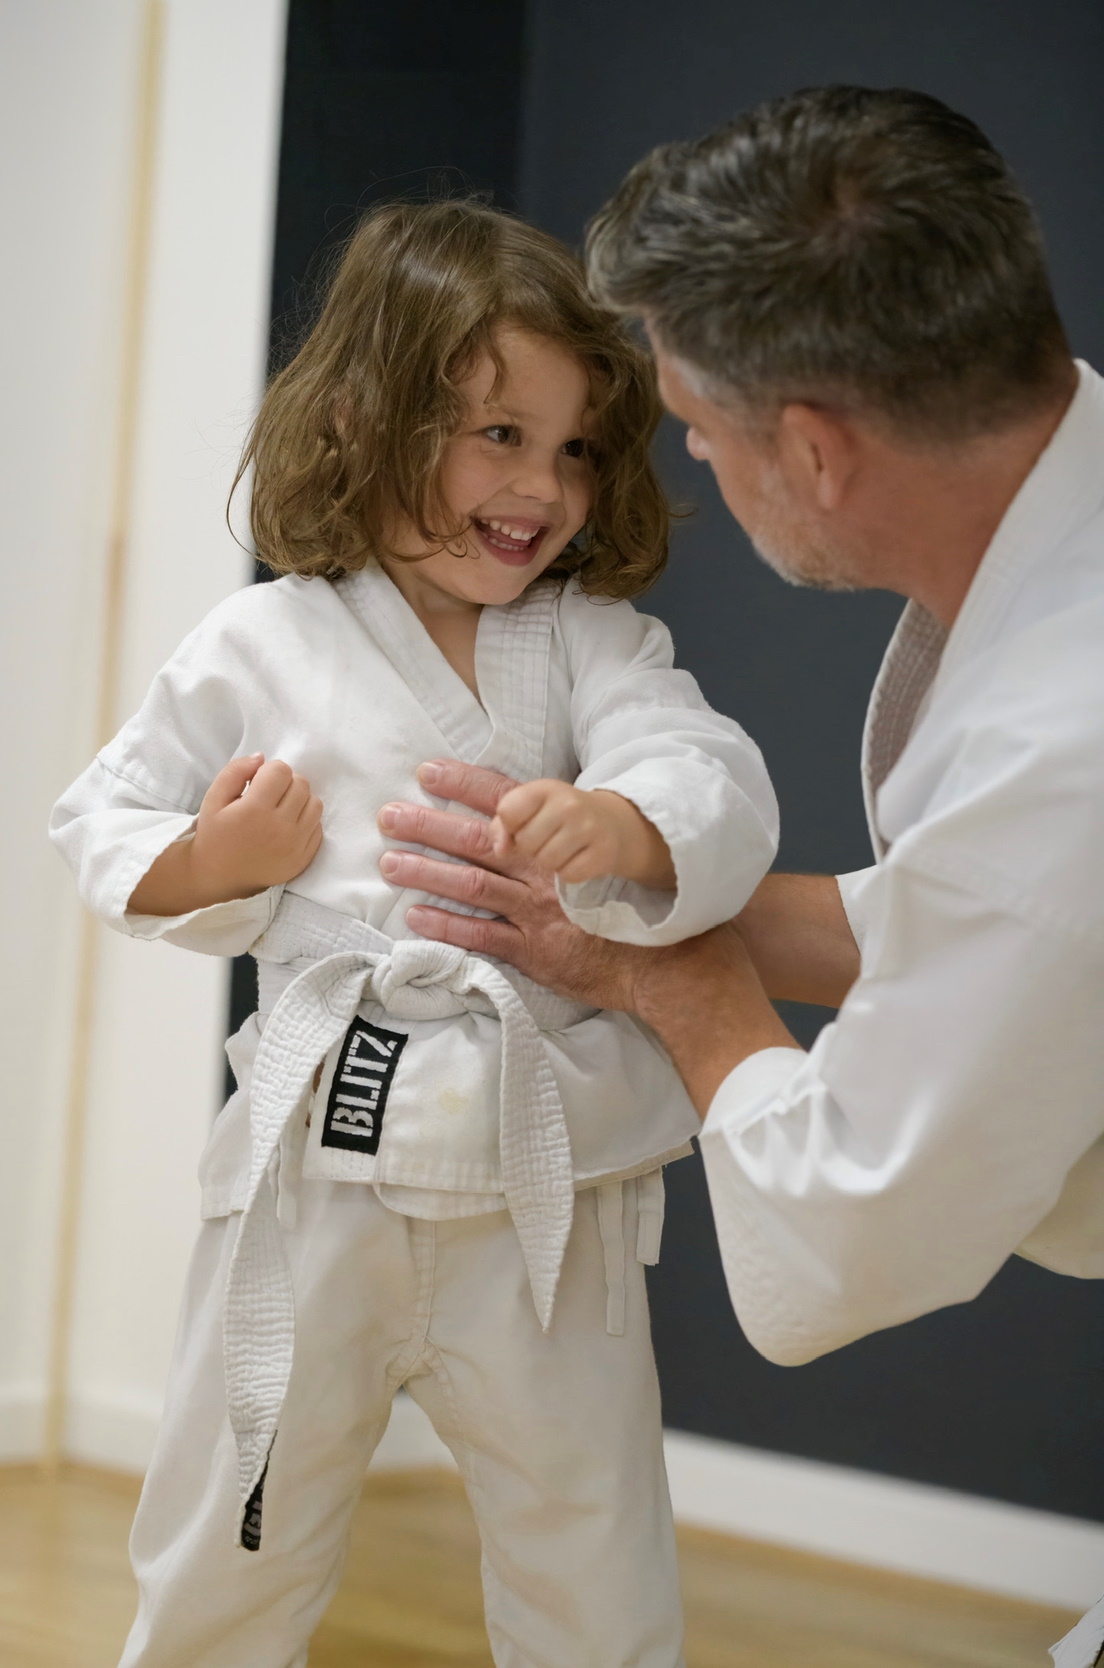 A young karate student smiles as their coach bends down to talk to them at eye level 